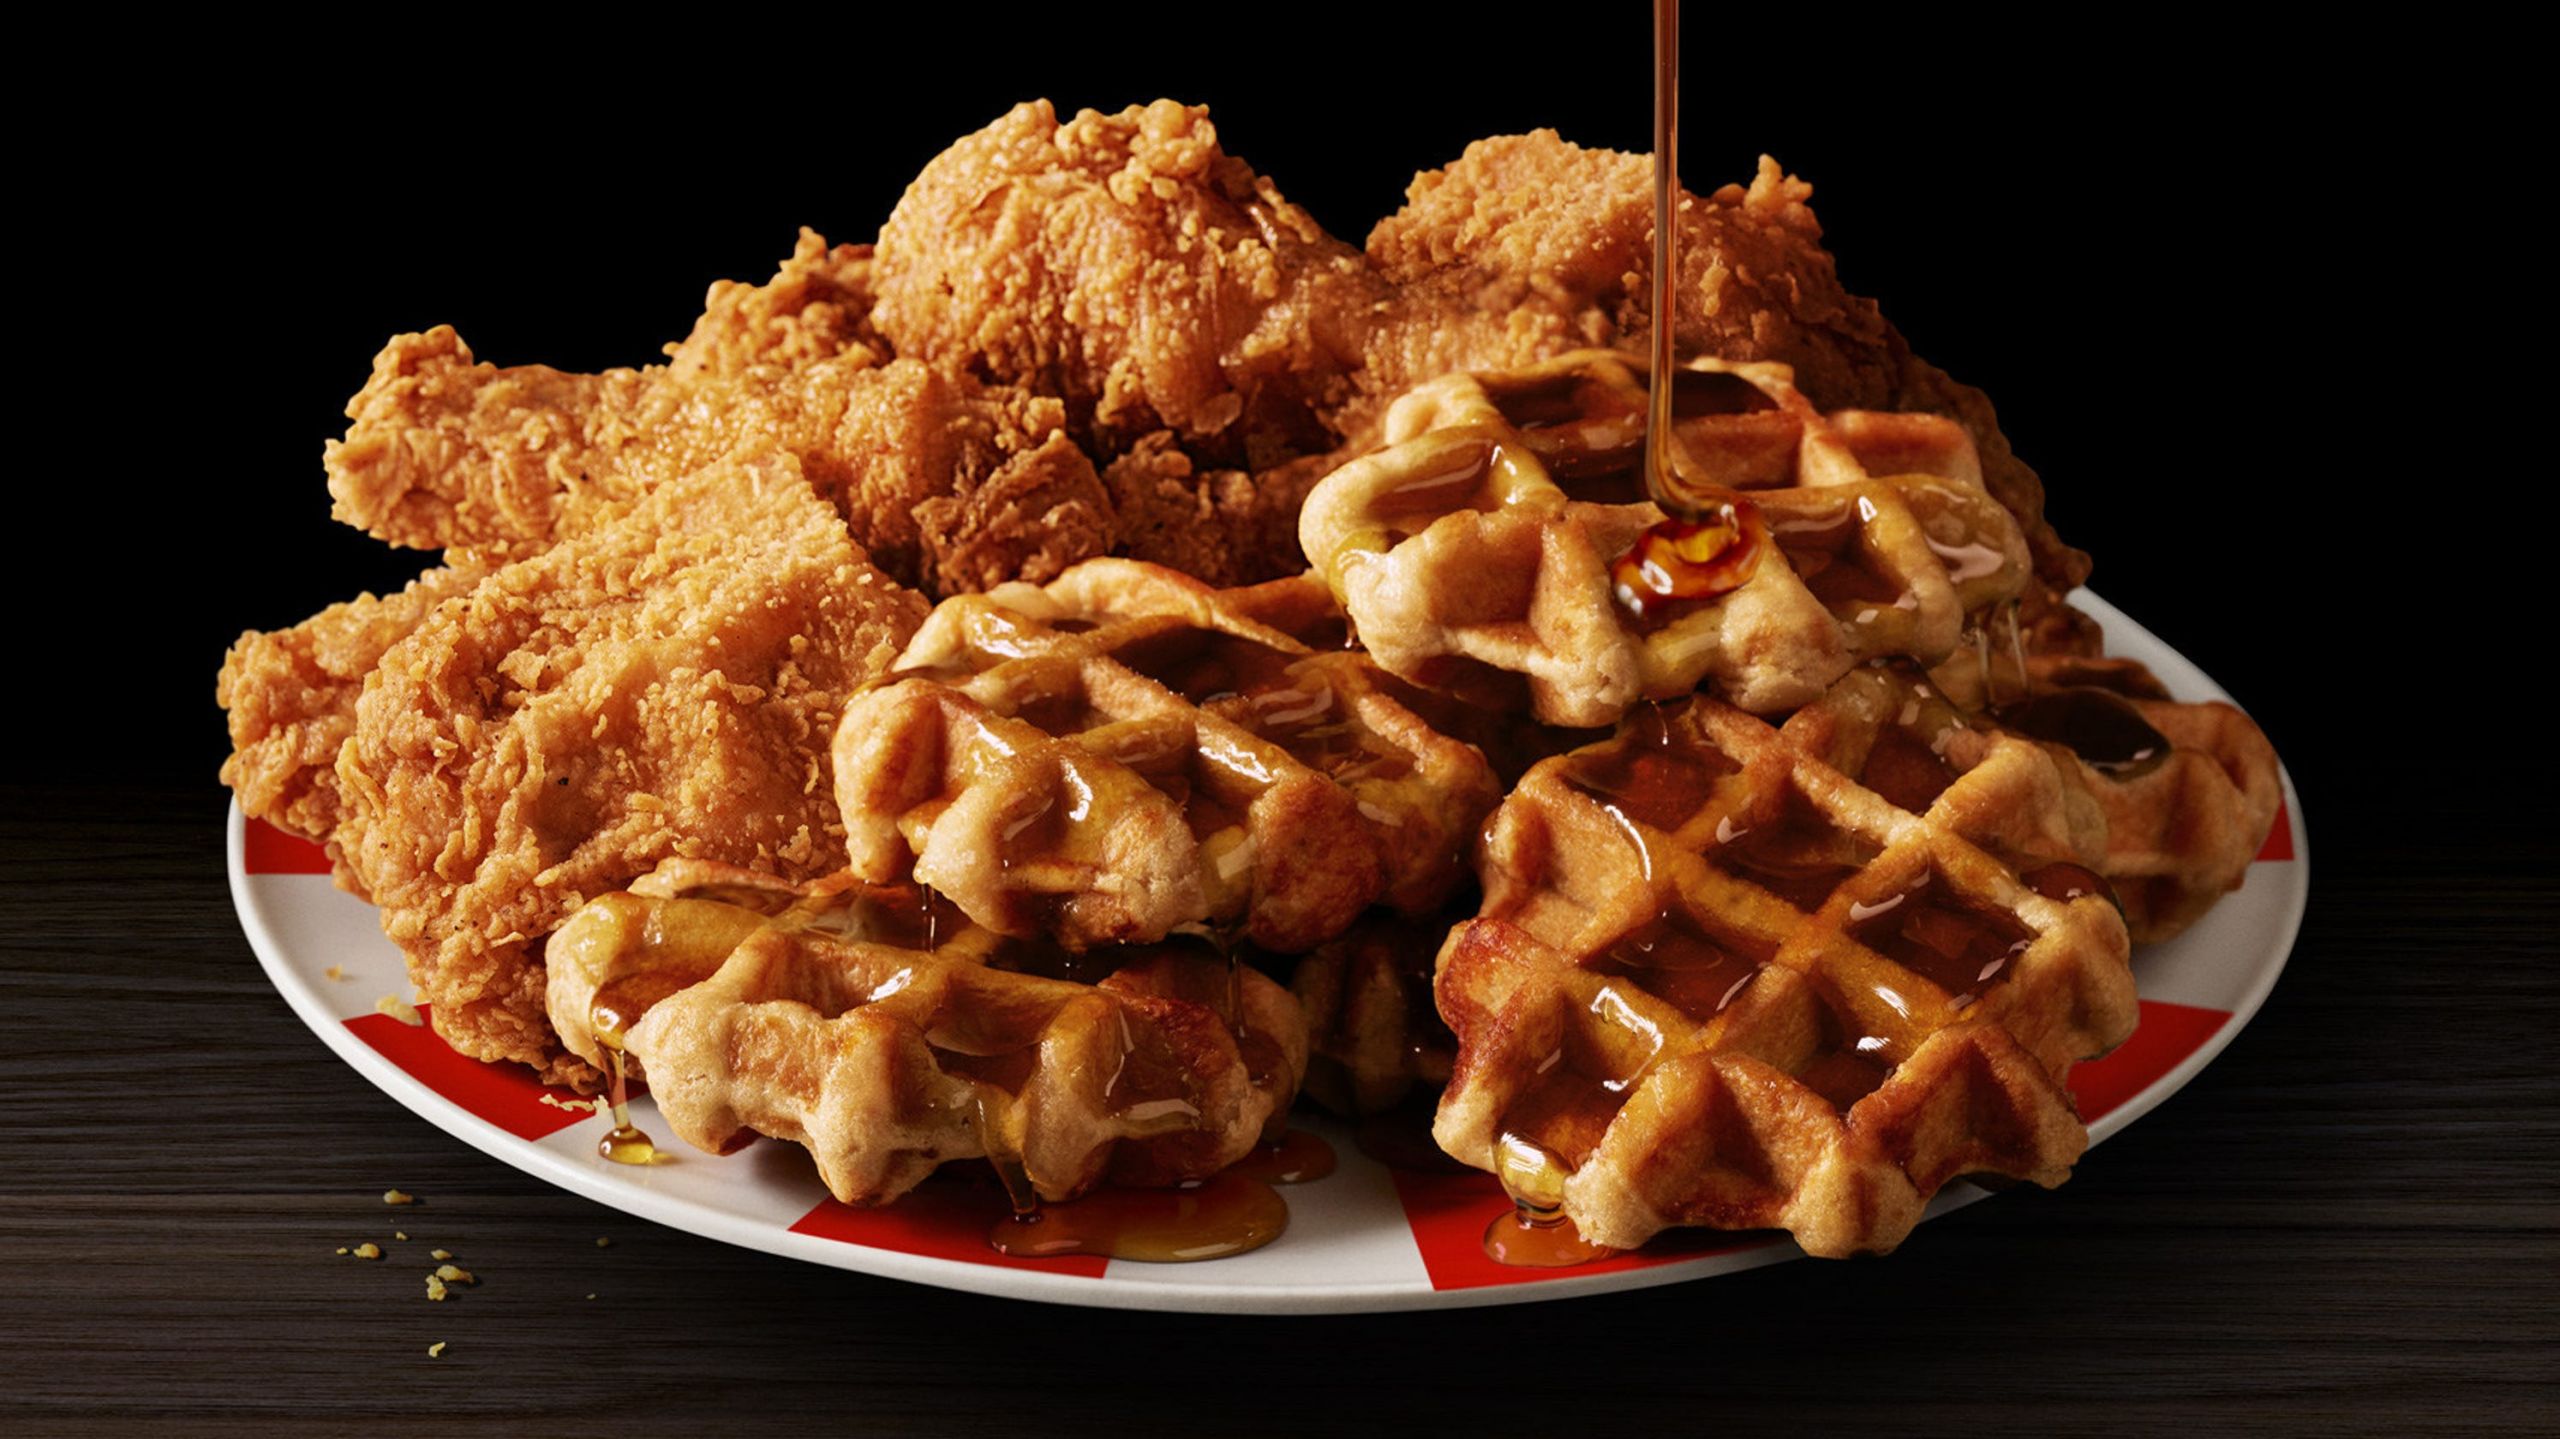 Chicken &amp; Waffles
 KFC chicken and waffles is added to menu for a limited time